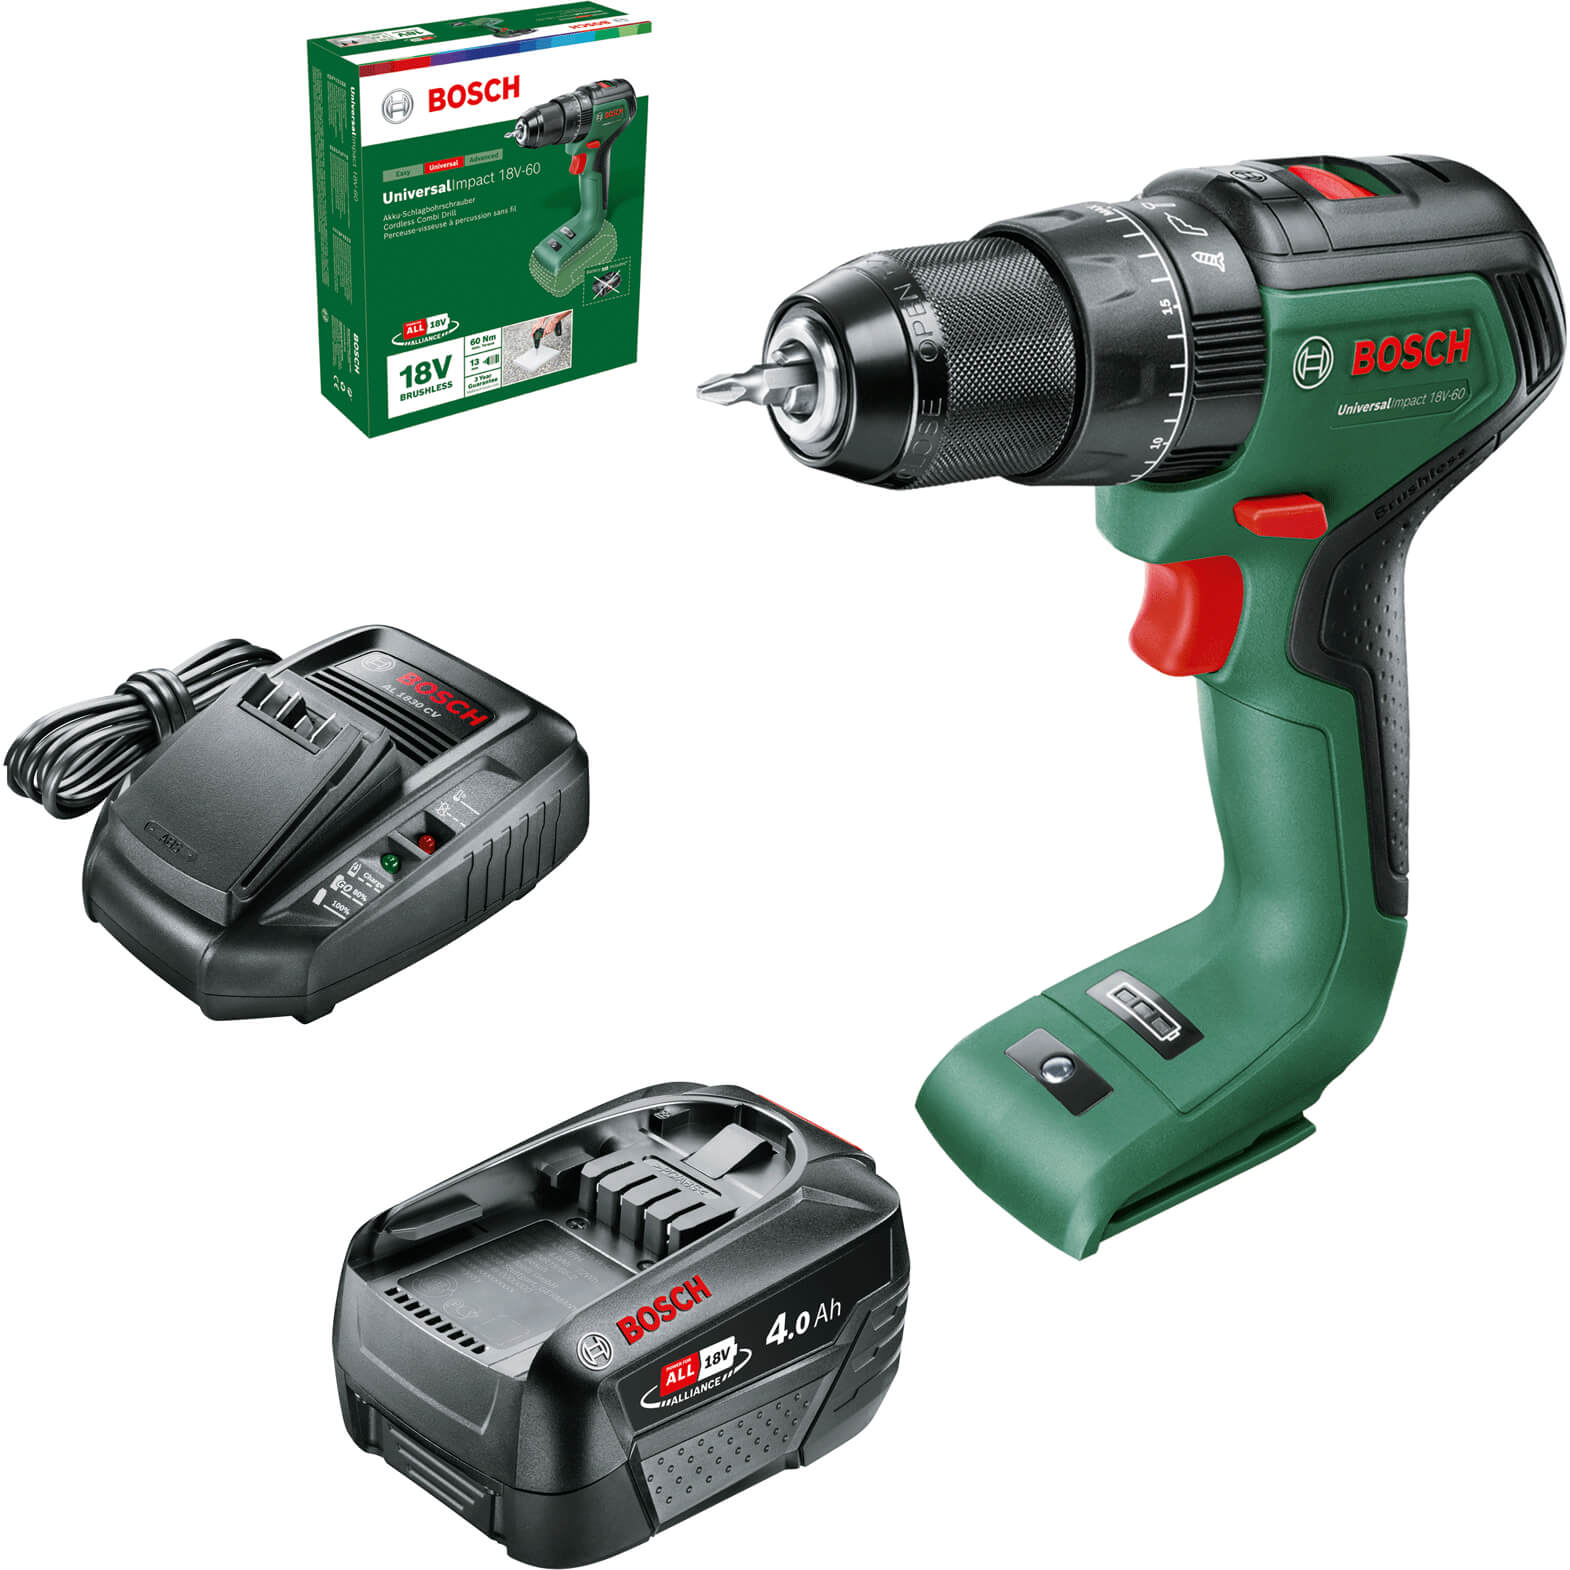 Image of Bosch UNIVERSALIMPACT 18V-60 18v Cordless Brushless Combi Drill 1 x 4ah Li-ion Charger No Case